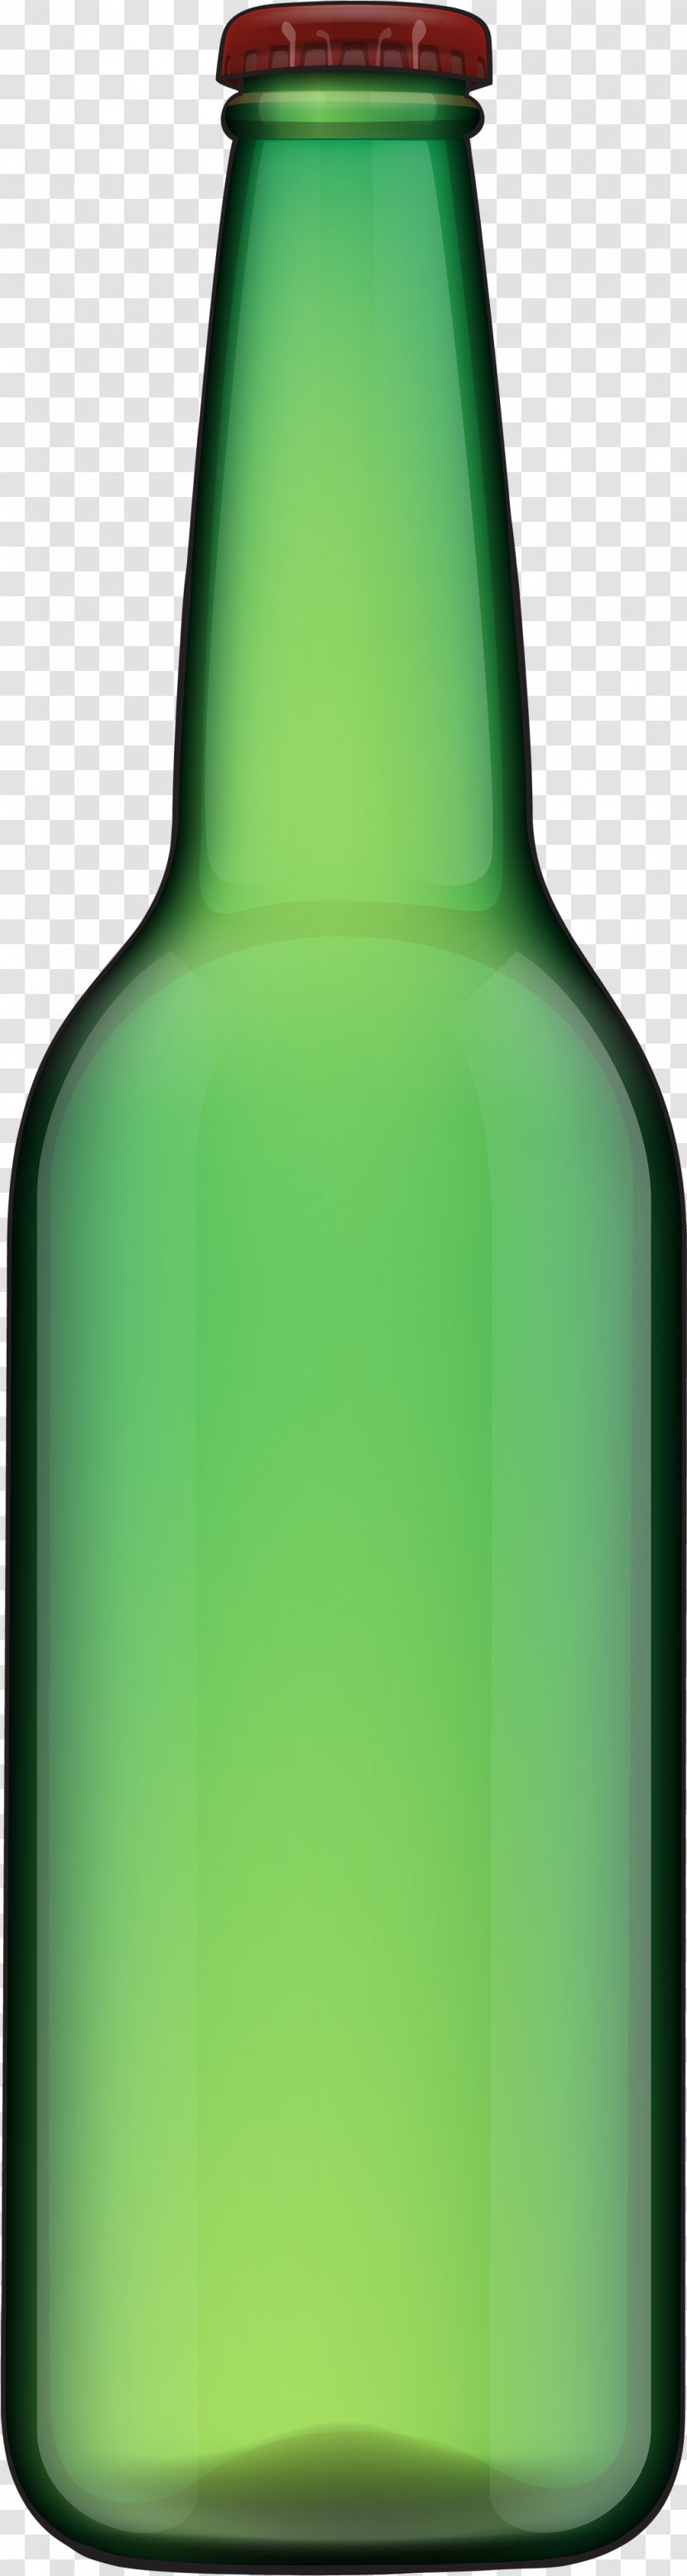 Plastic Bottle - Green - Water Alcohol Transparent PNG